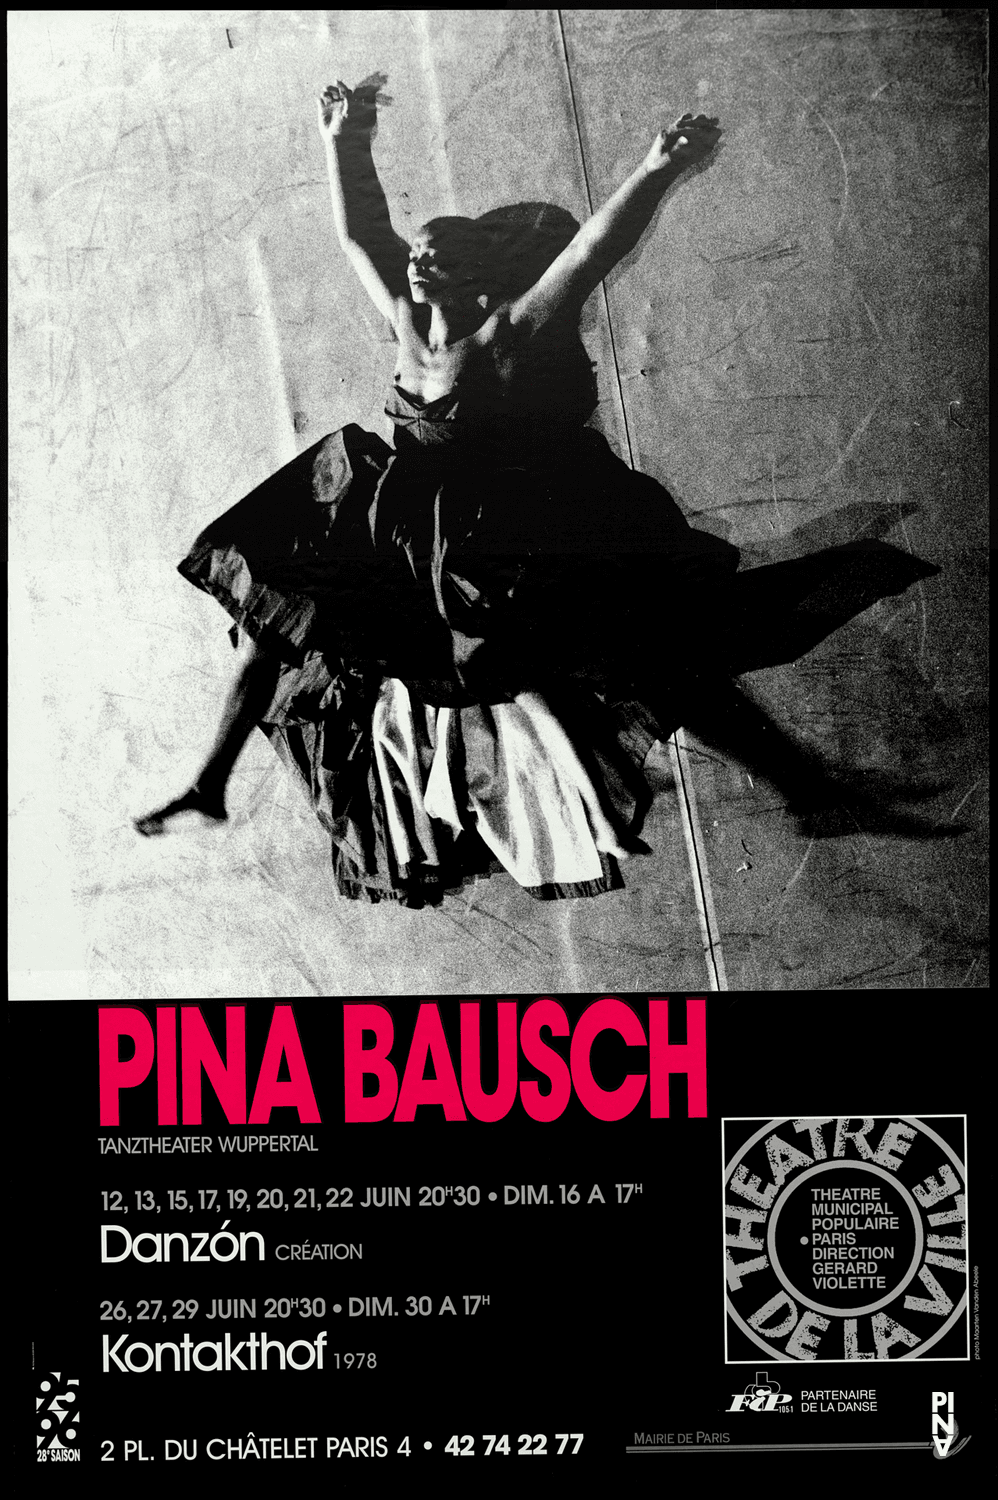 Poster for “Danzón” and “Kontakthof” by Pina Bausch in Paris, 06/12/1996 – 06/30/1996